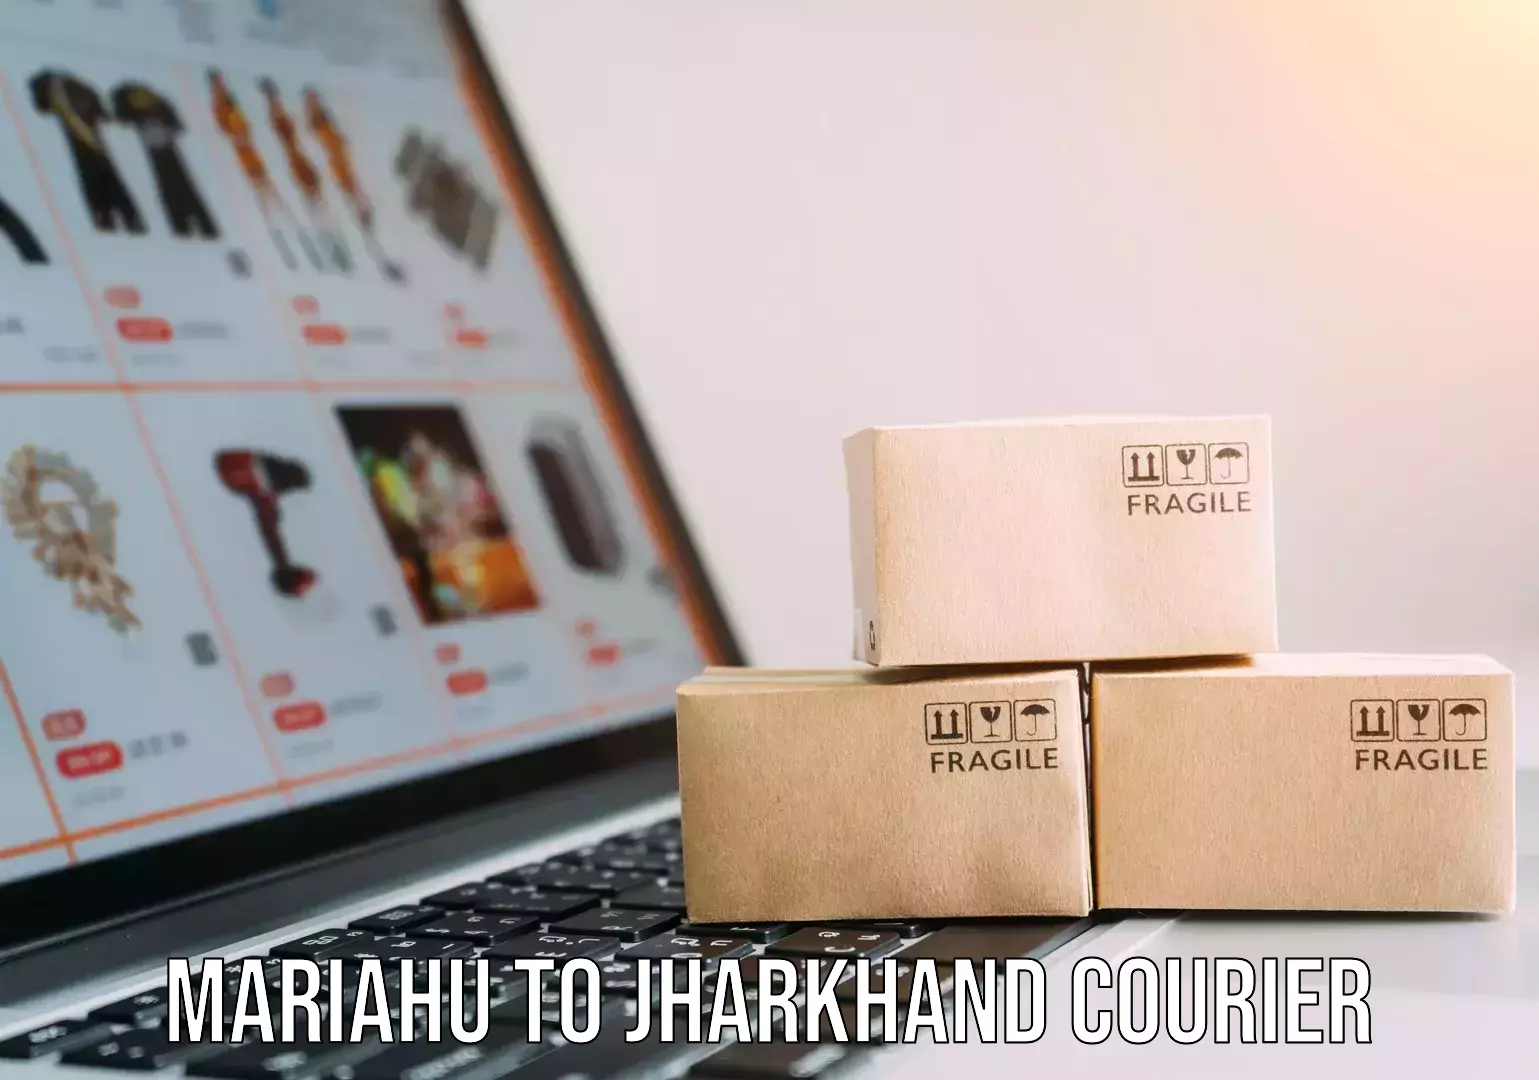 Professional movers and packers Mariahu to Jharkhand